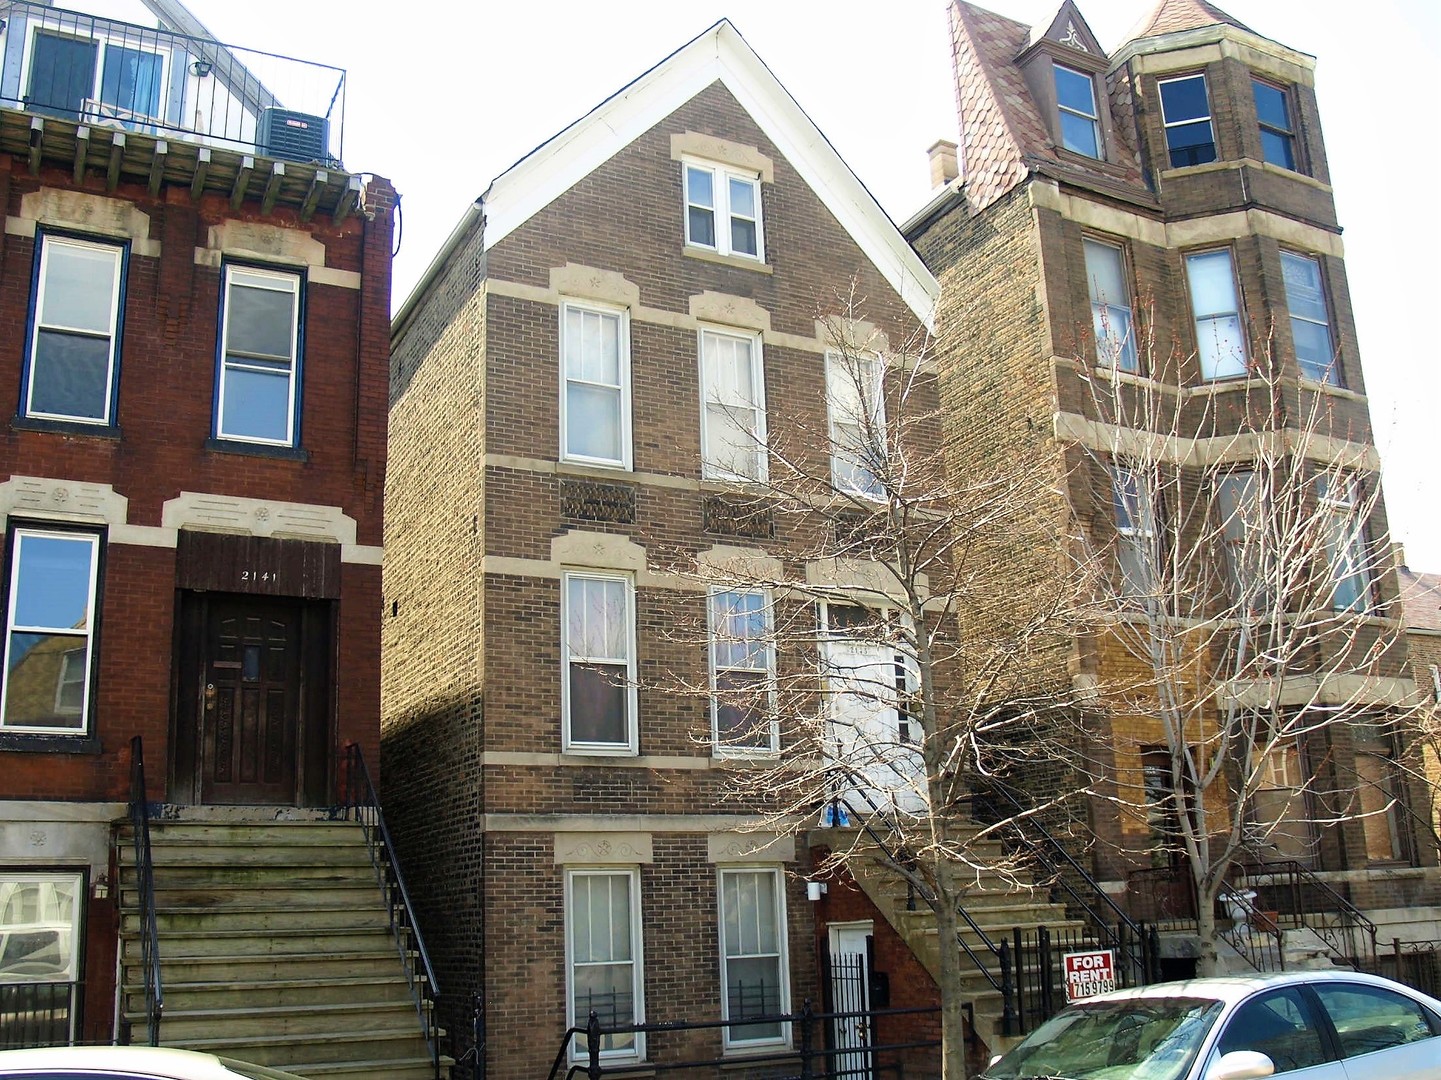 Photo of 2145 Webster CHICAGO IL 60647